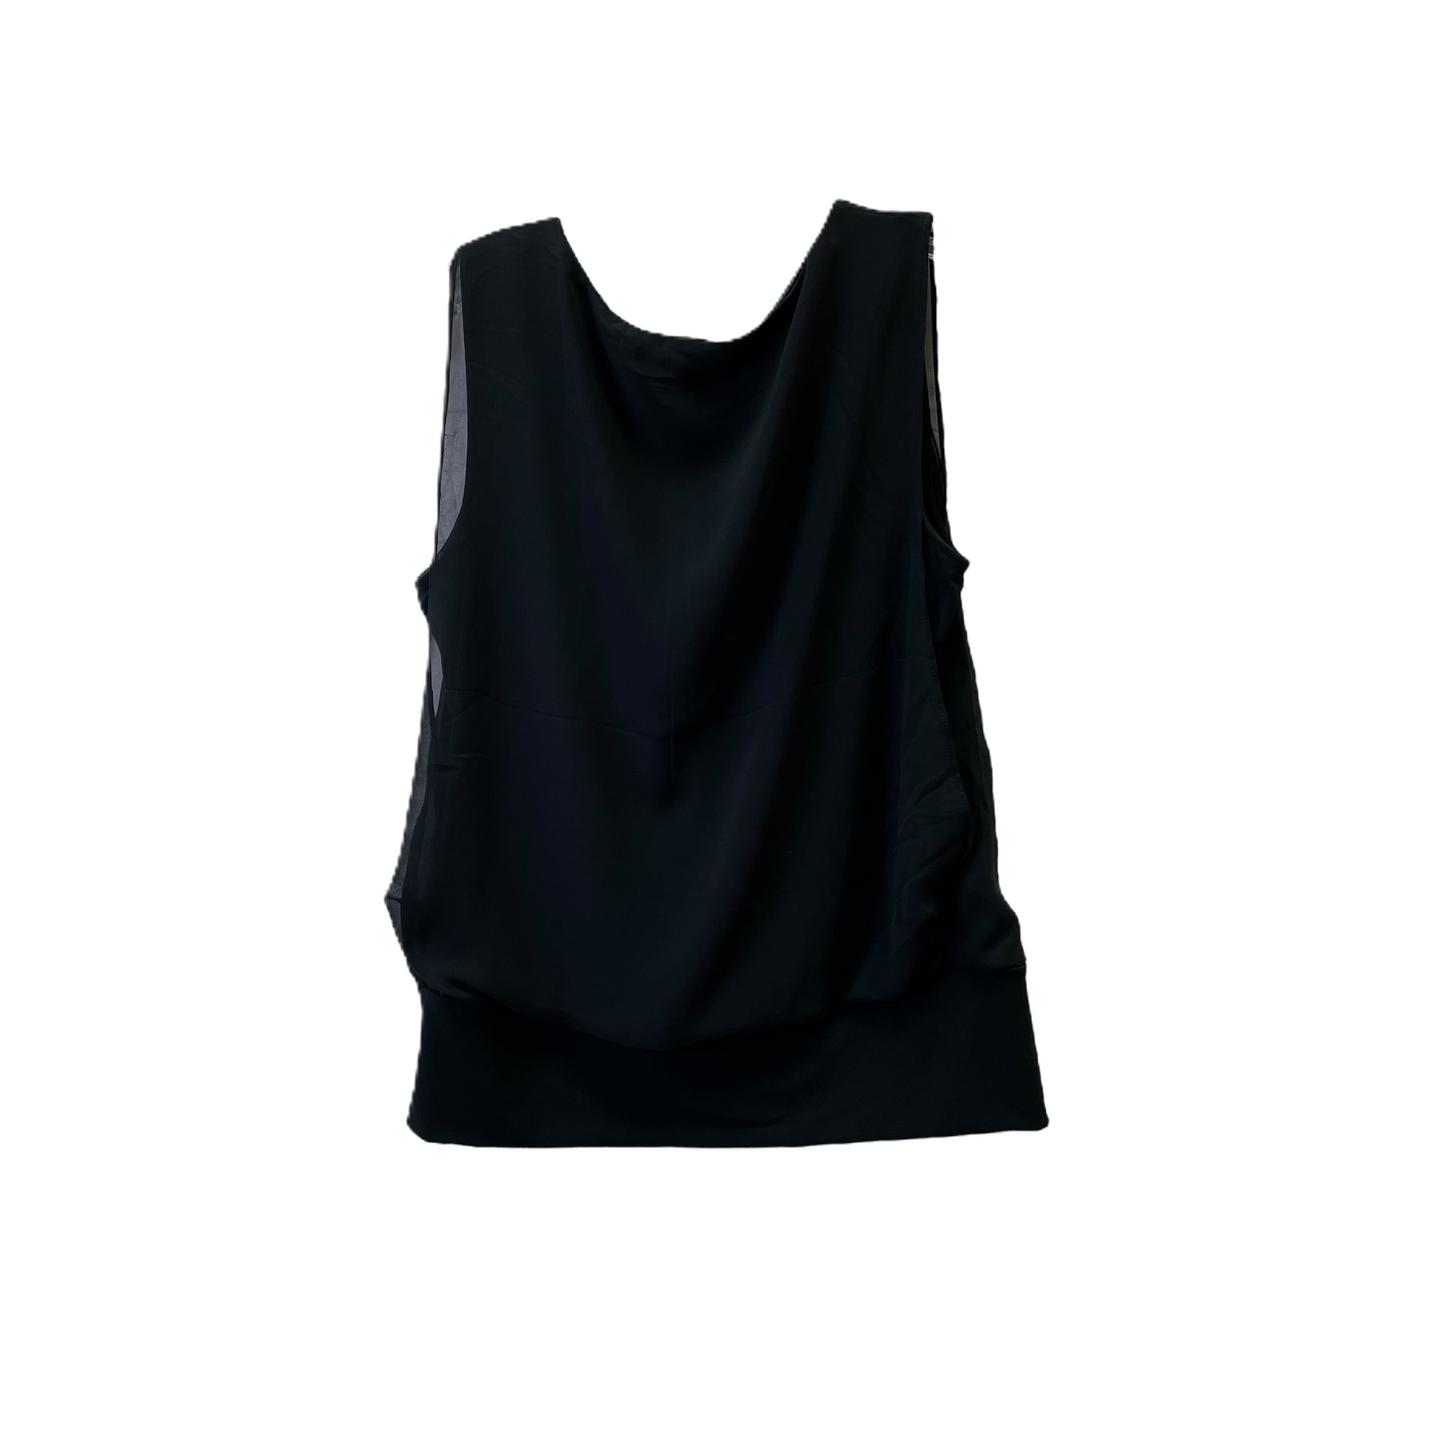 Black Top Sleeveless By New York And Co, Size: M